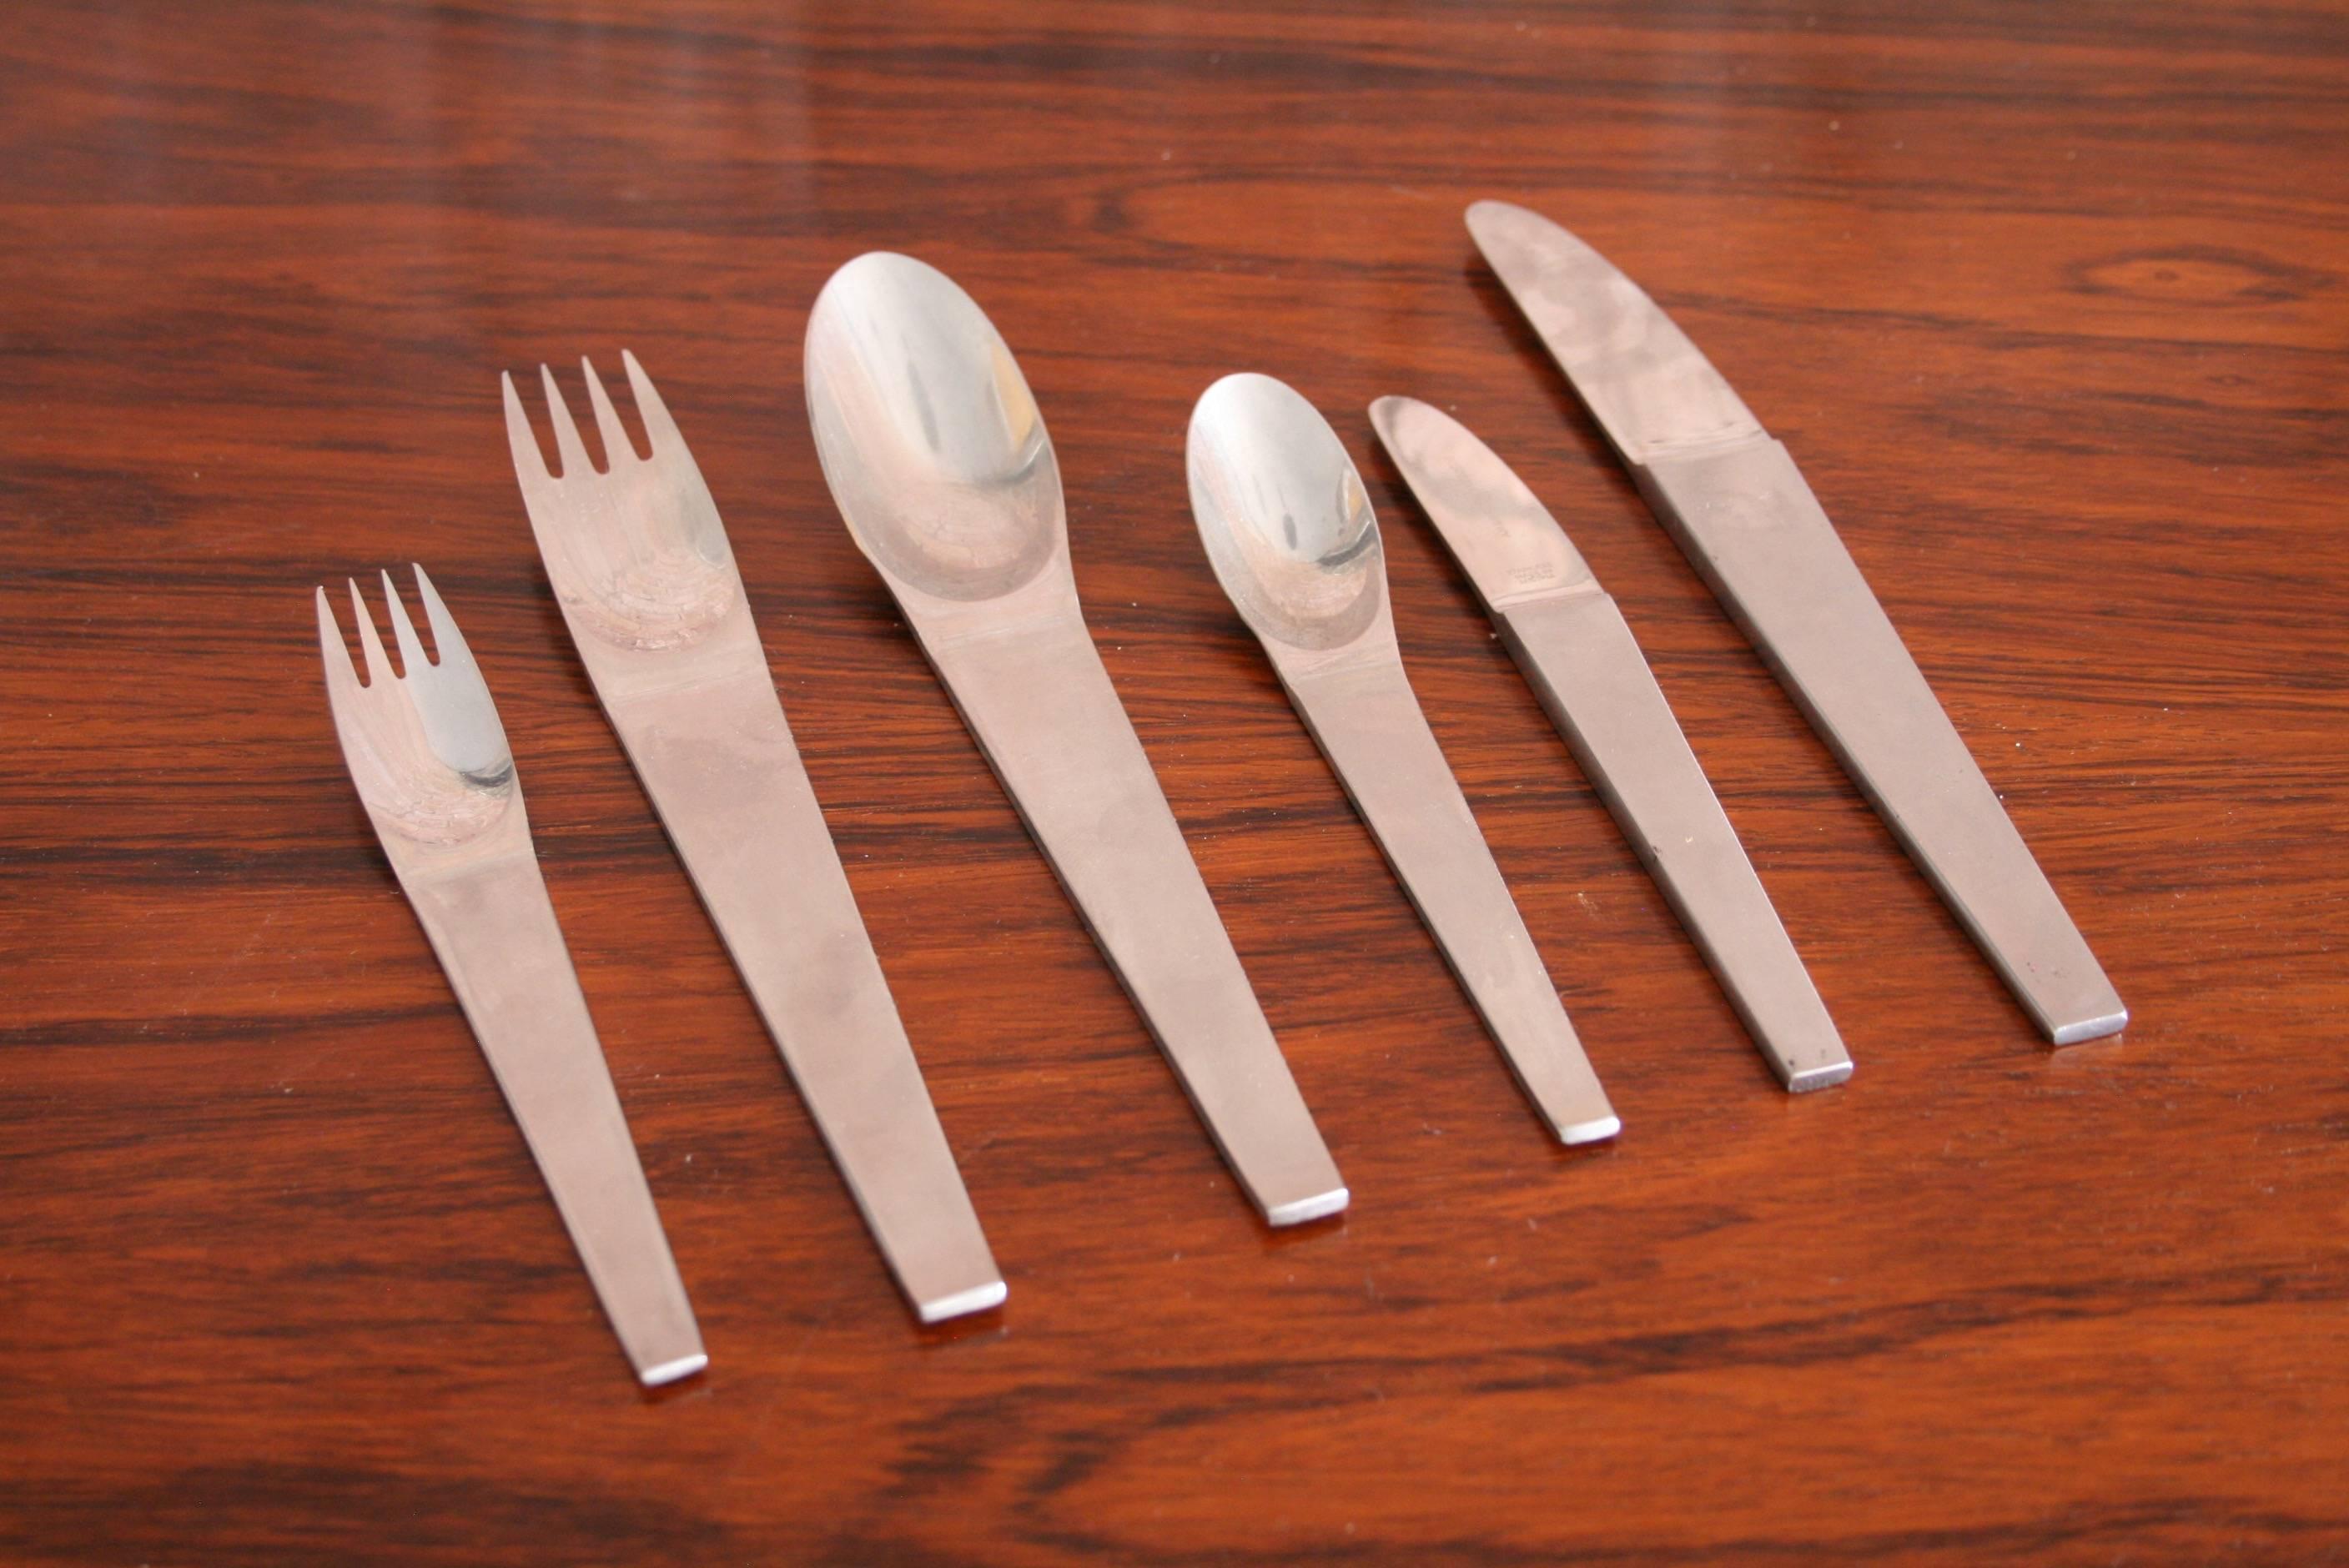 The set includes:
11 knives
Eight dinner forks
Six salad forks
11 soup spoons
Ten tea spoons
Three coffee spoons
Nine butter knives

(58 pieces total).